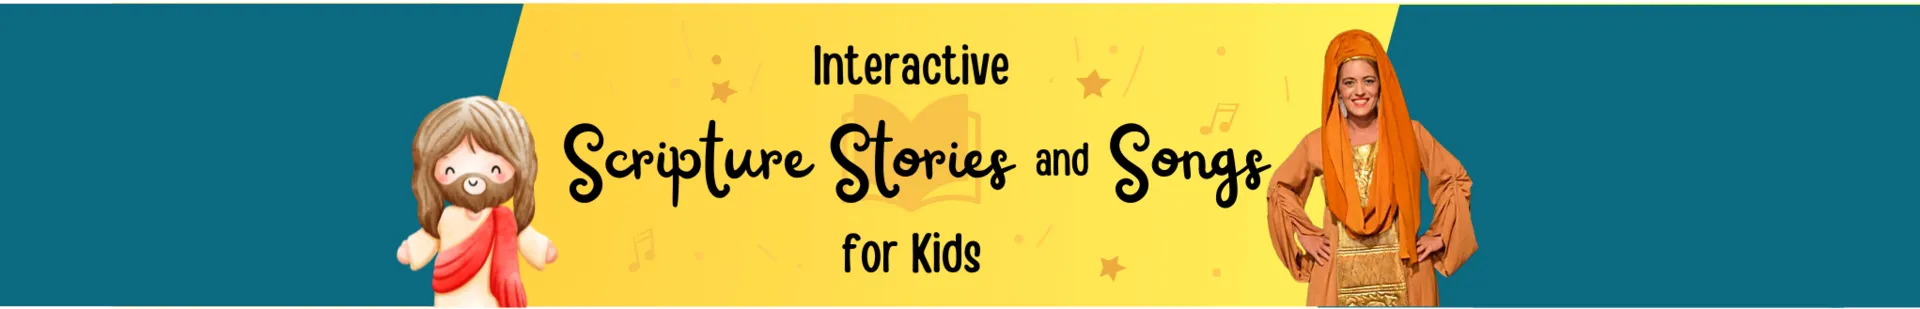 interactive scripture stories & songs for kids